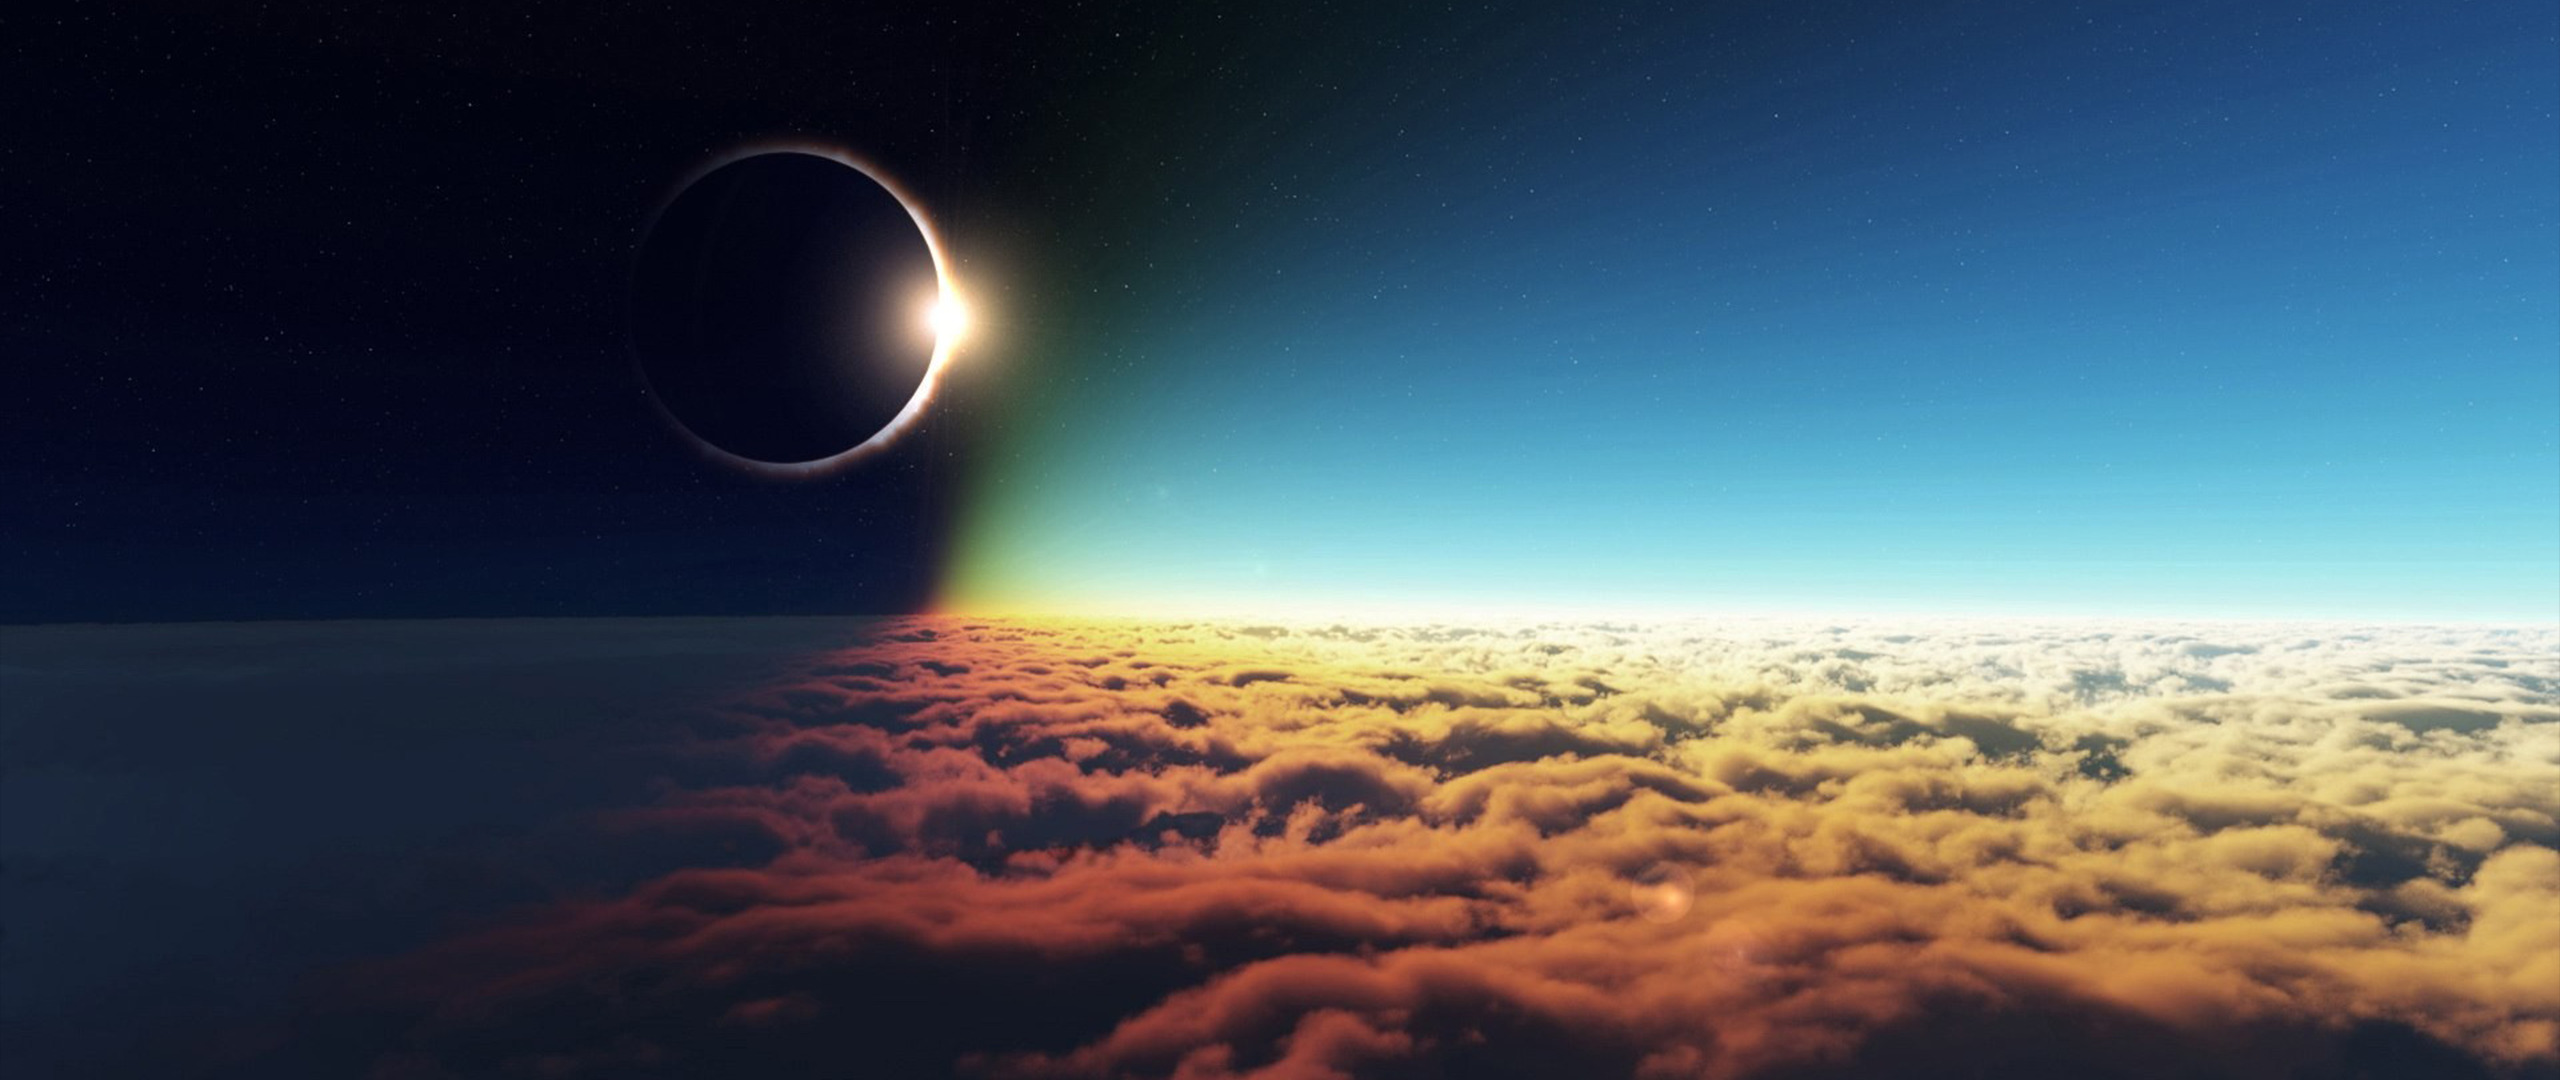 ultra wide, Photography, Sky, Solar eclipse, Eclipse Wallpaper